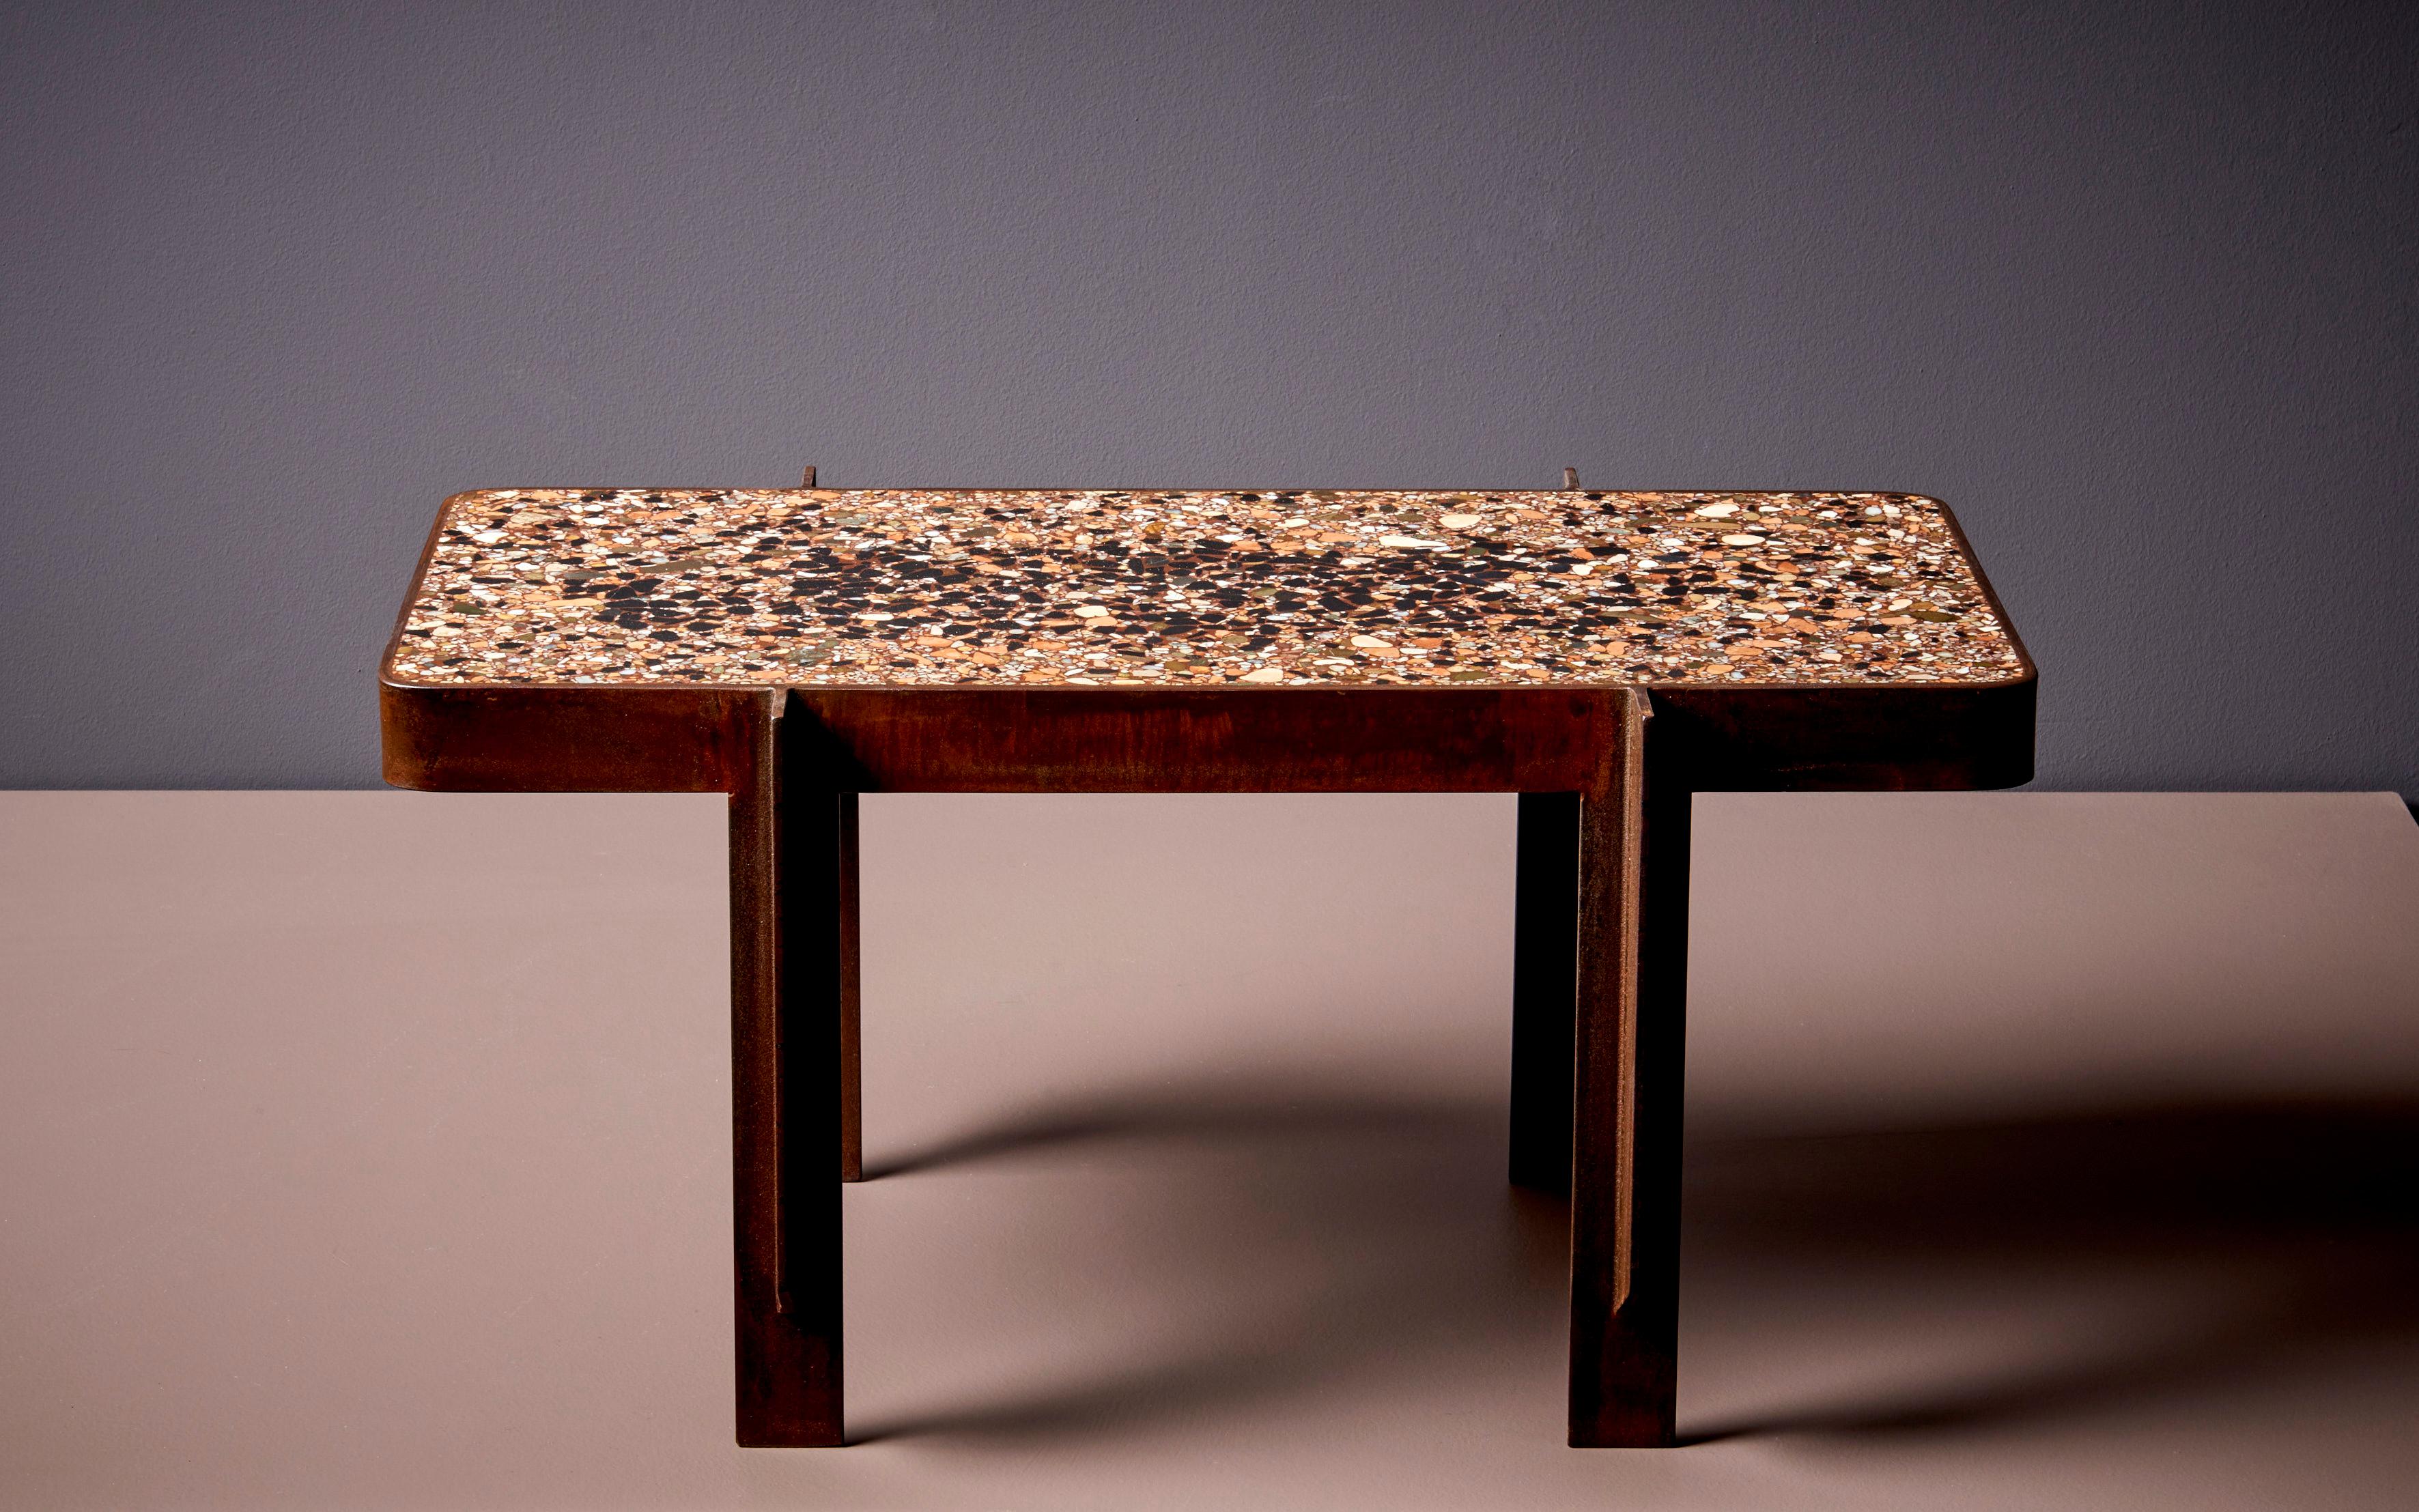 This table has been made in three different sizes, please check our other listings for further information. Each item made by Felix Muhrhofer is a hand-crafted, one-of-a-kind piece. Muhrhofer is an Austrian designer who primarily works with steel